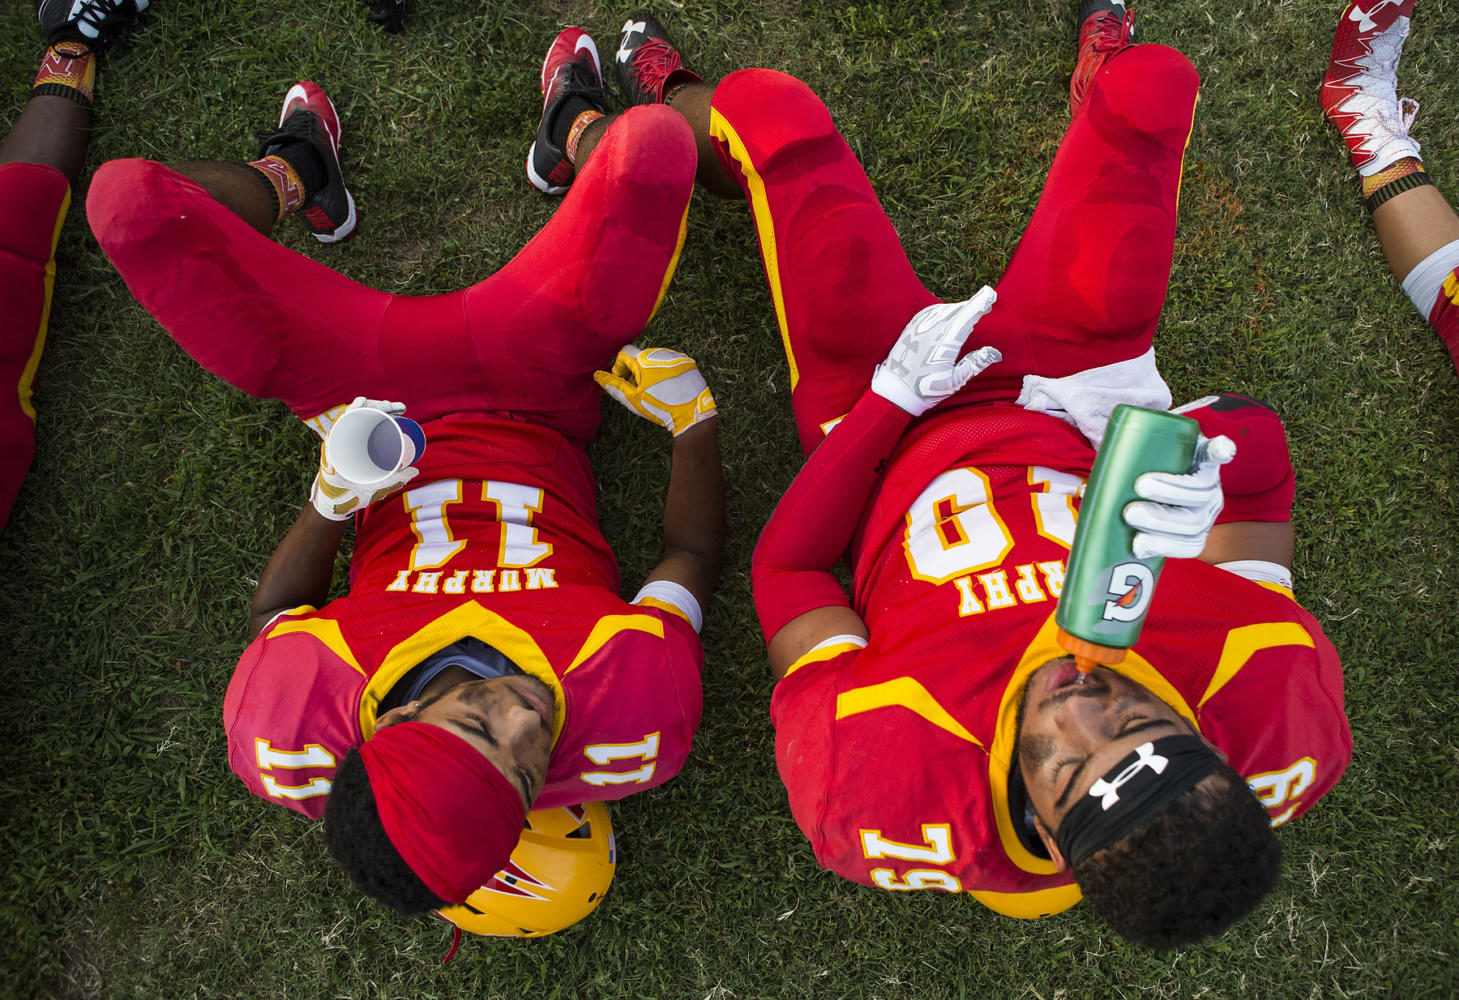 Murphysboro quarterback Gavin Topp, left, and outside linebacker Mo Valliant rest prior to kickoff of the 100th meeting between the Murphysboro Red Devils and the Carbondale Terriers on Friday, Aug. 25, 2017, at Doc Bencini Field, in Murphysboro, Illinois. (Ryan Michalesko | @photosbylesko)